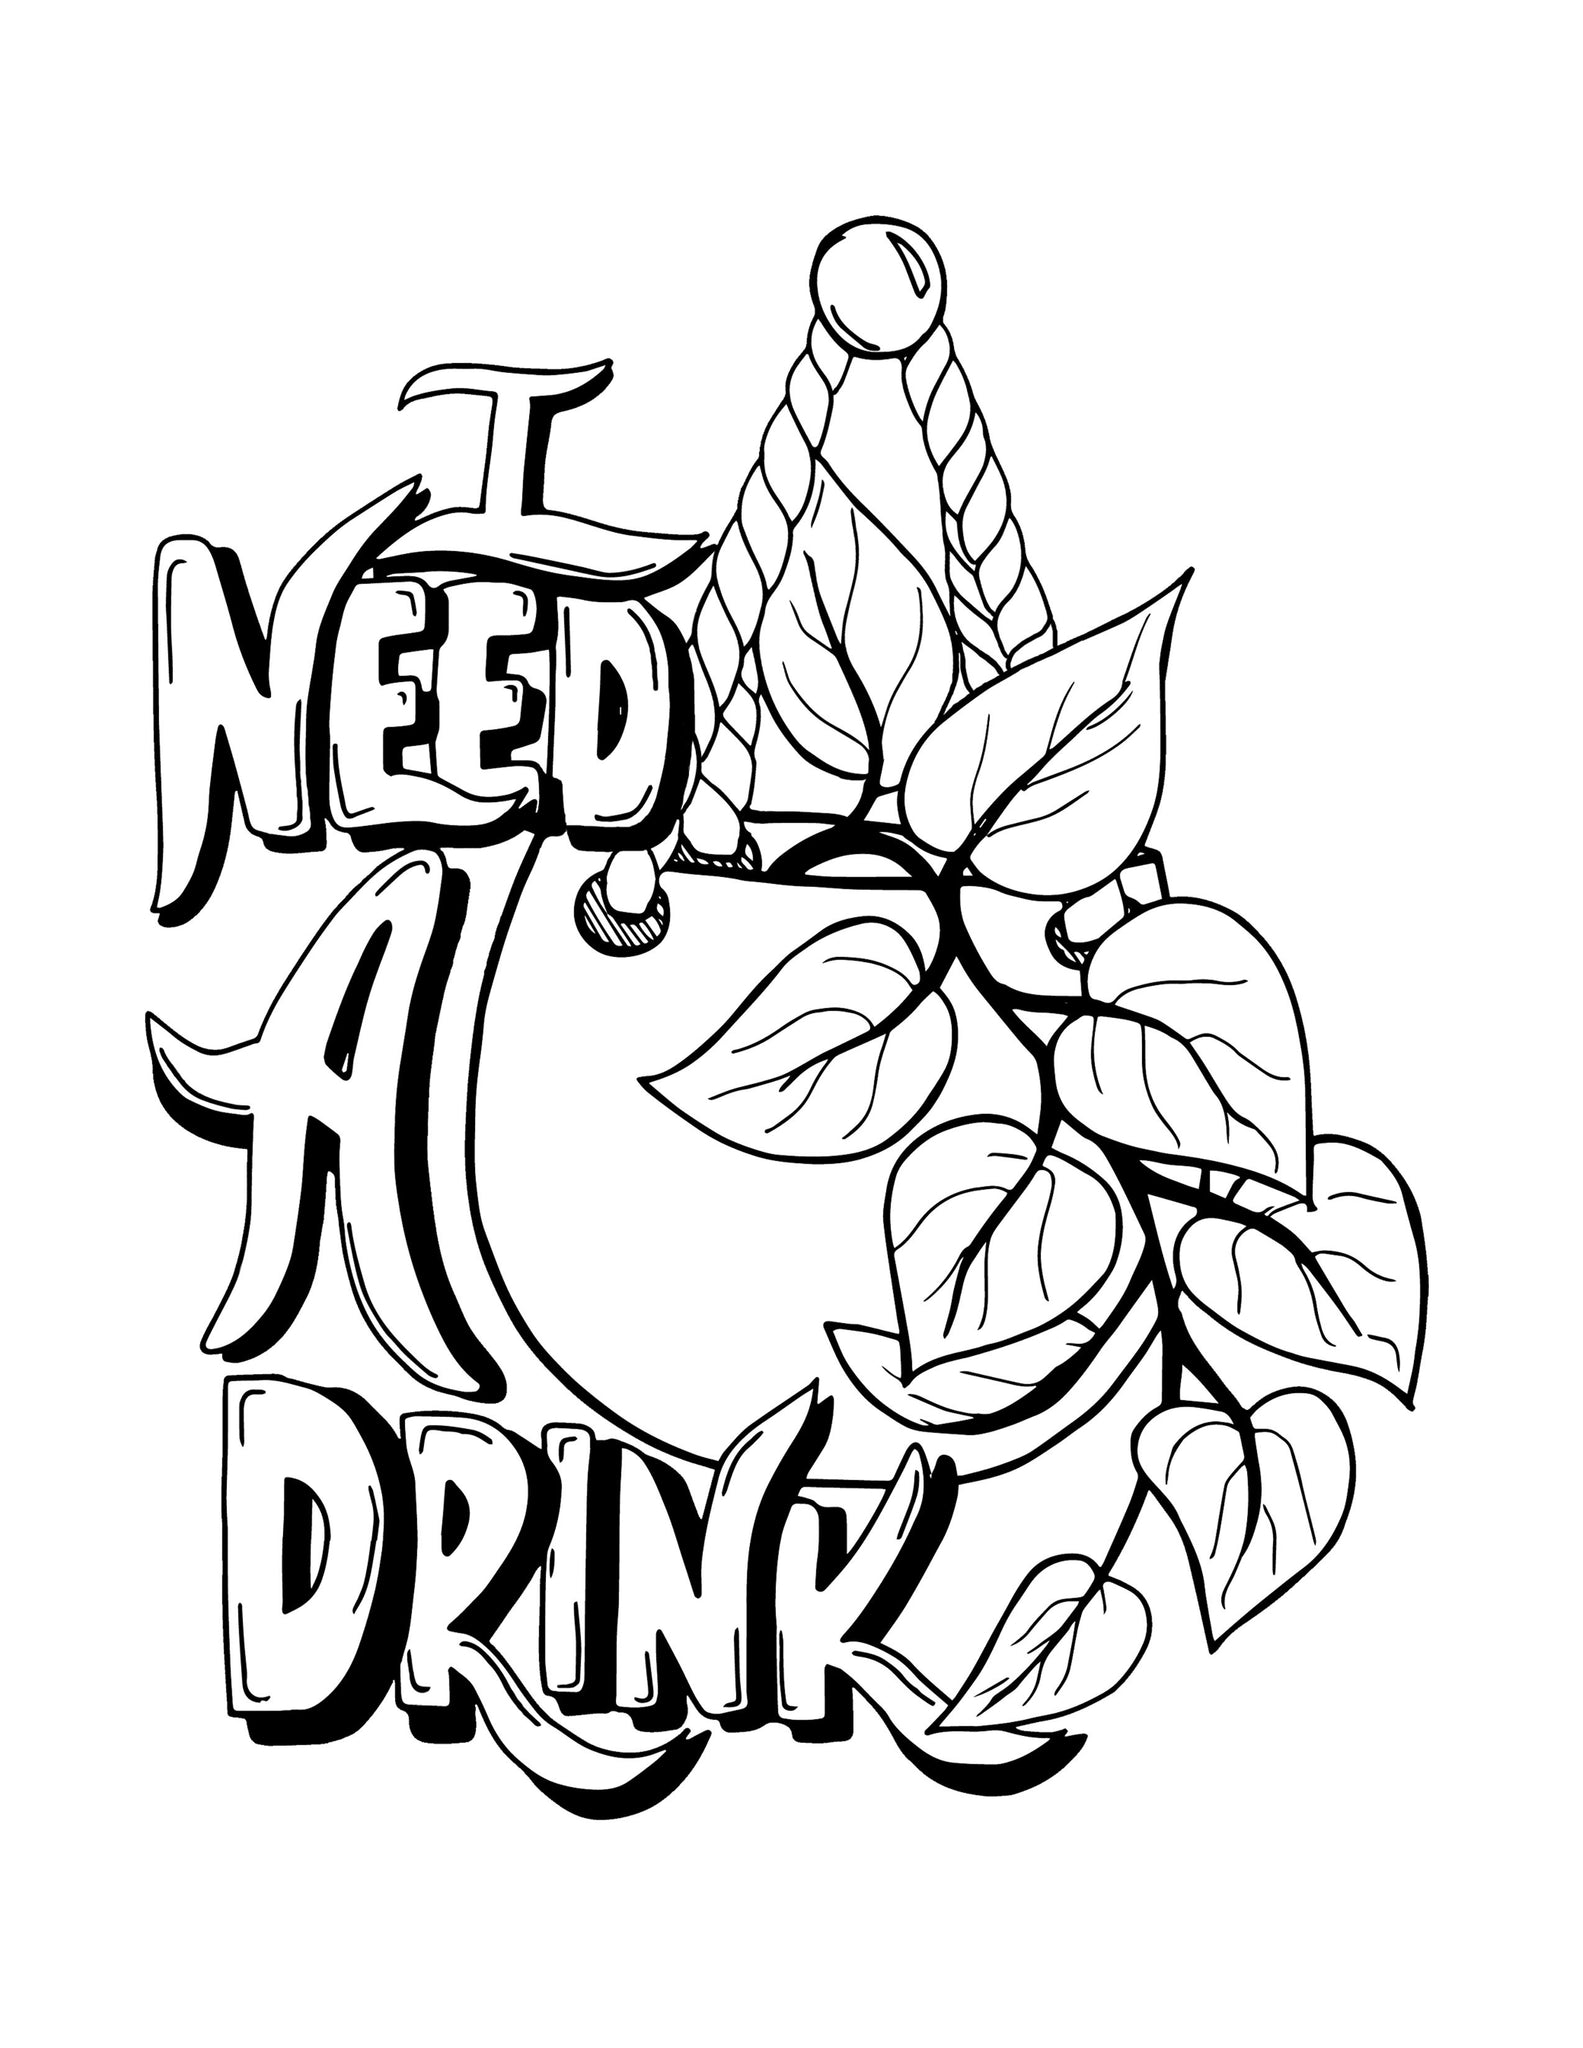 I need a drink typography saying with hanging plant illustration in black and white